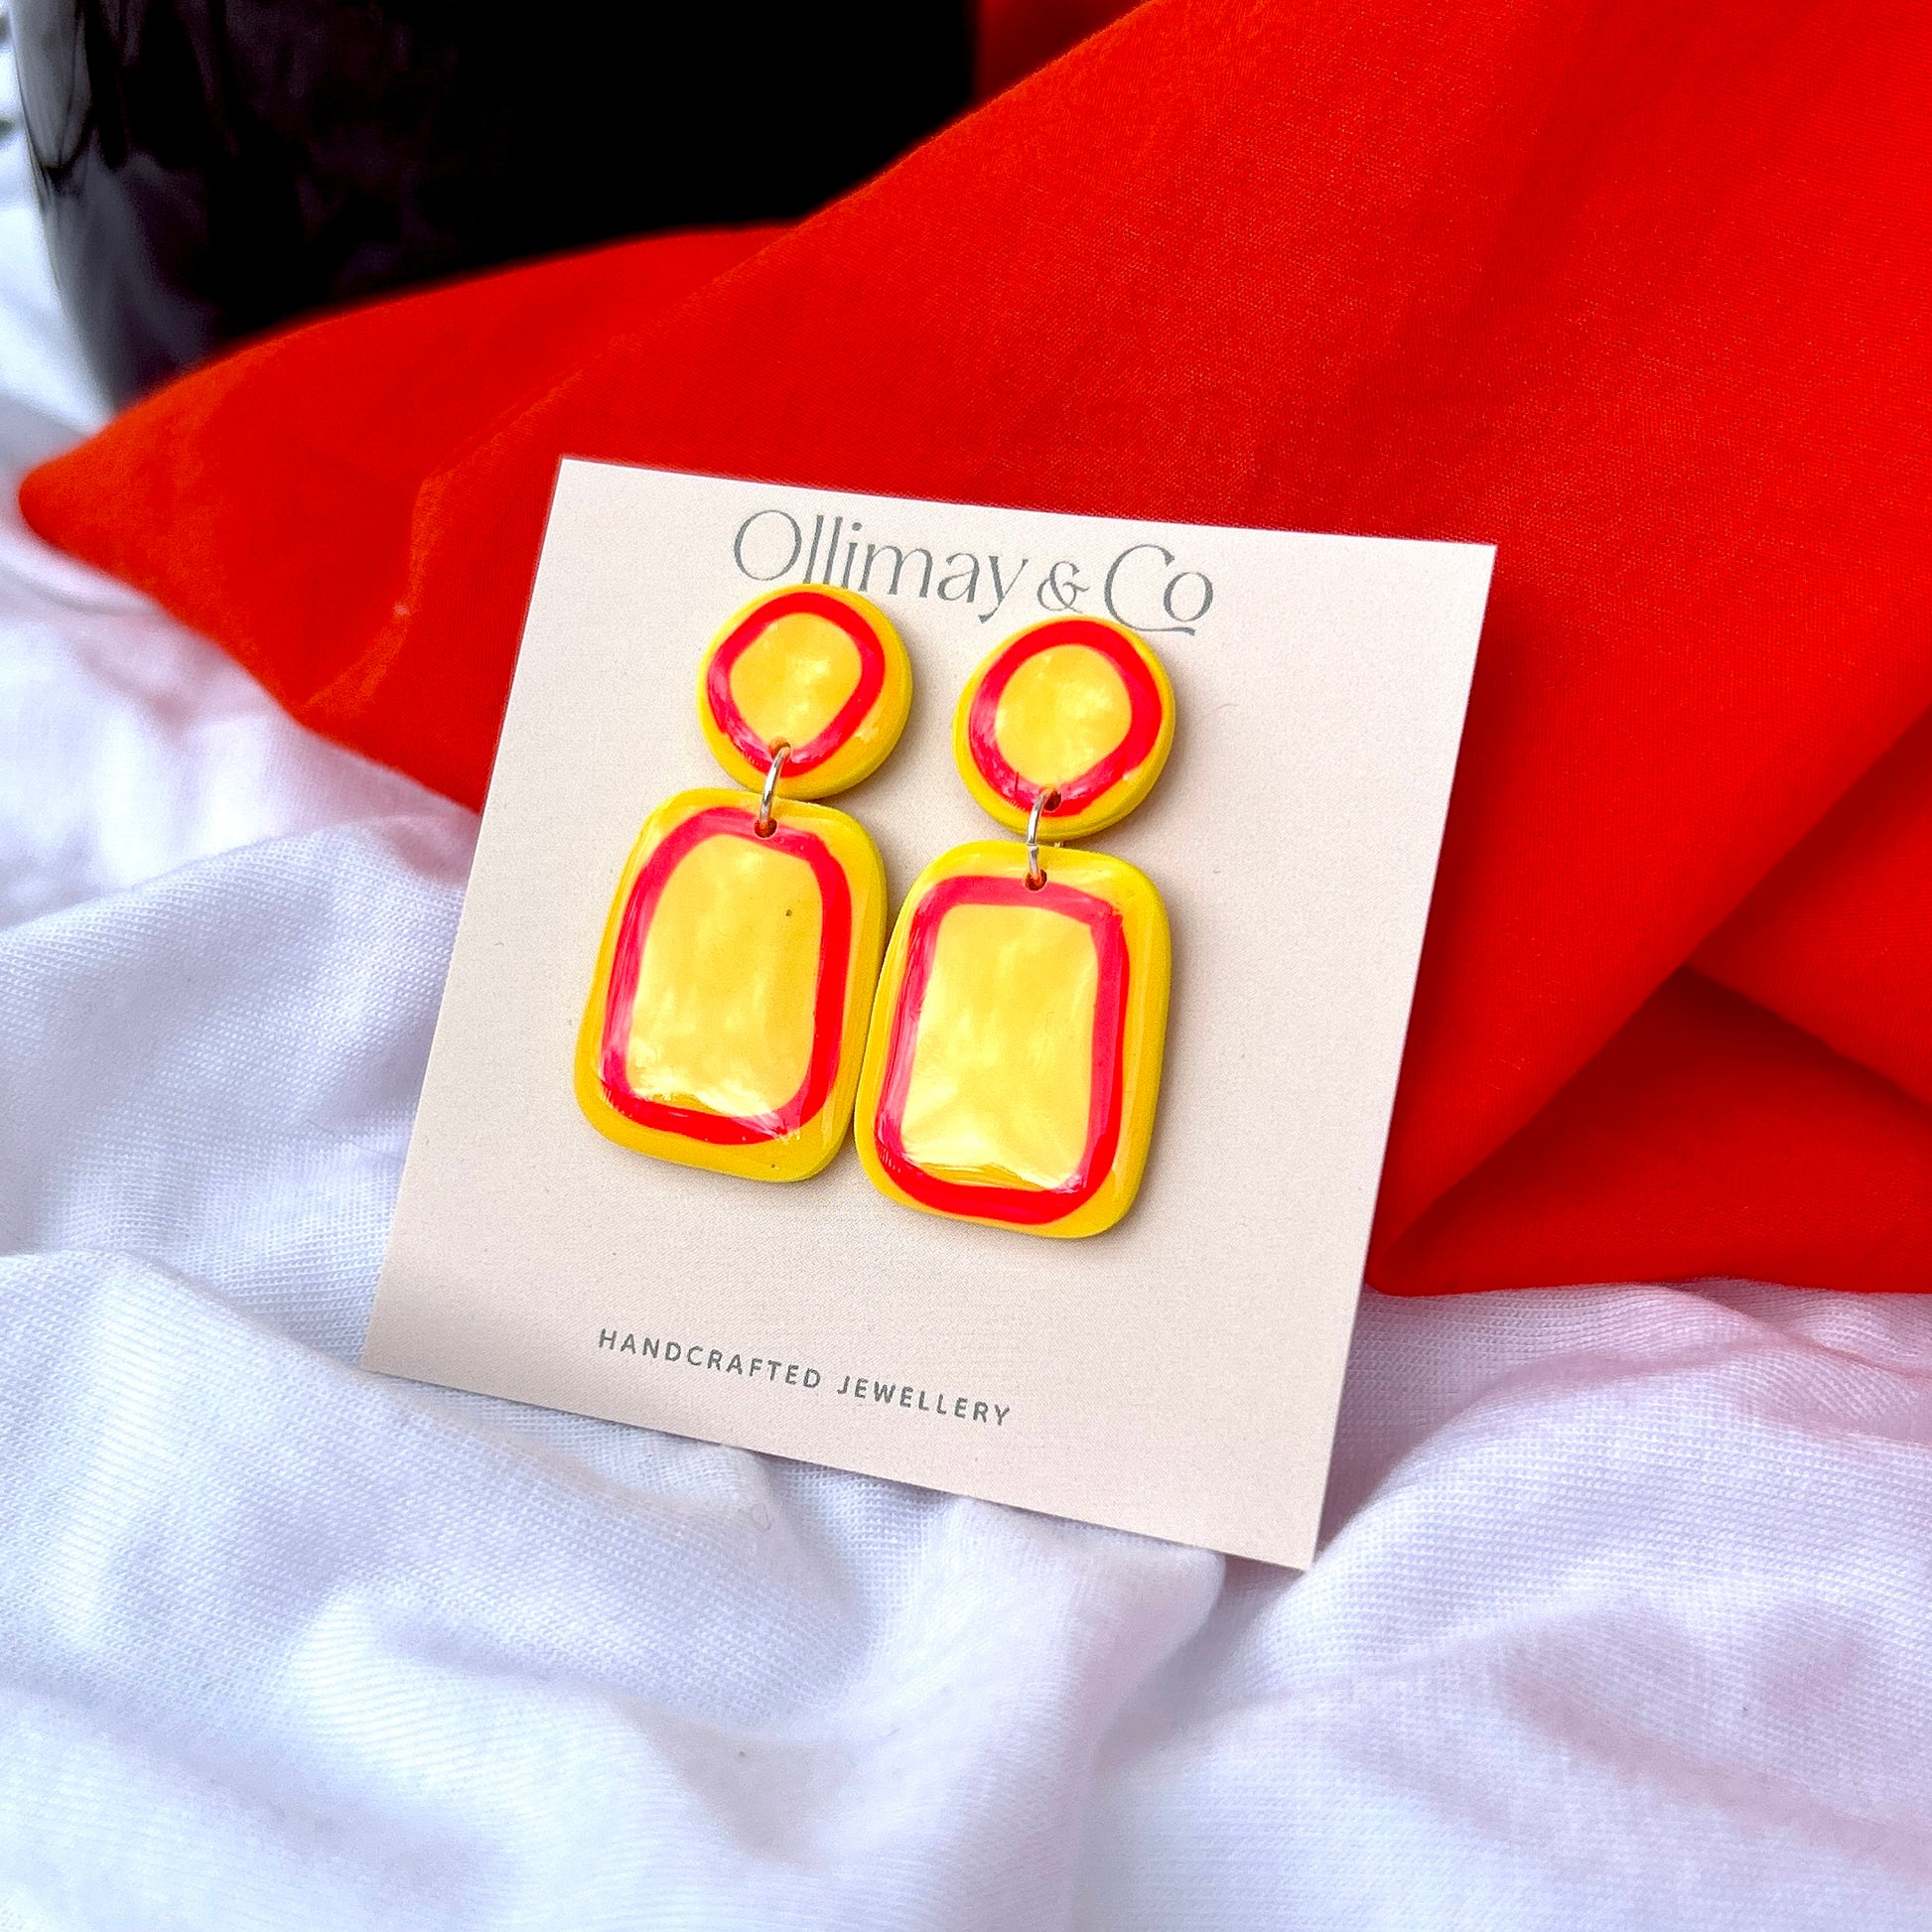 Retro Yellow Earrings Handmade by Ollimay and Co